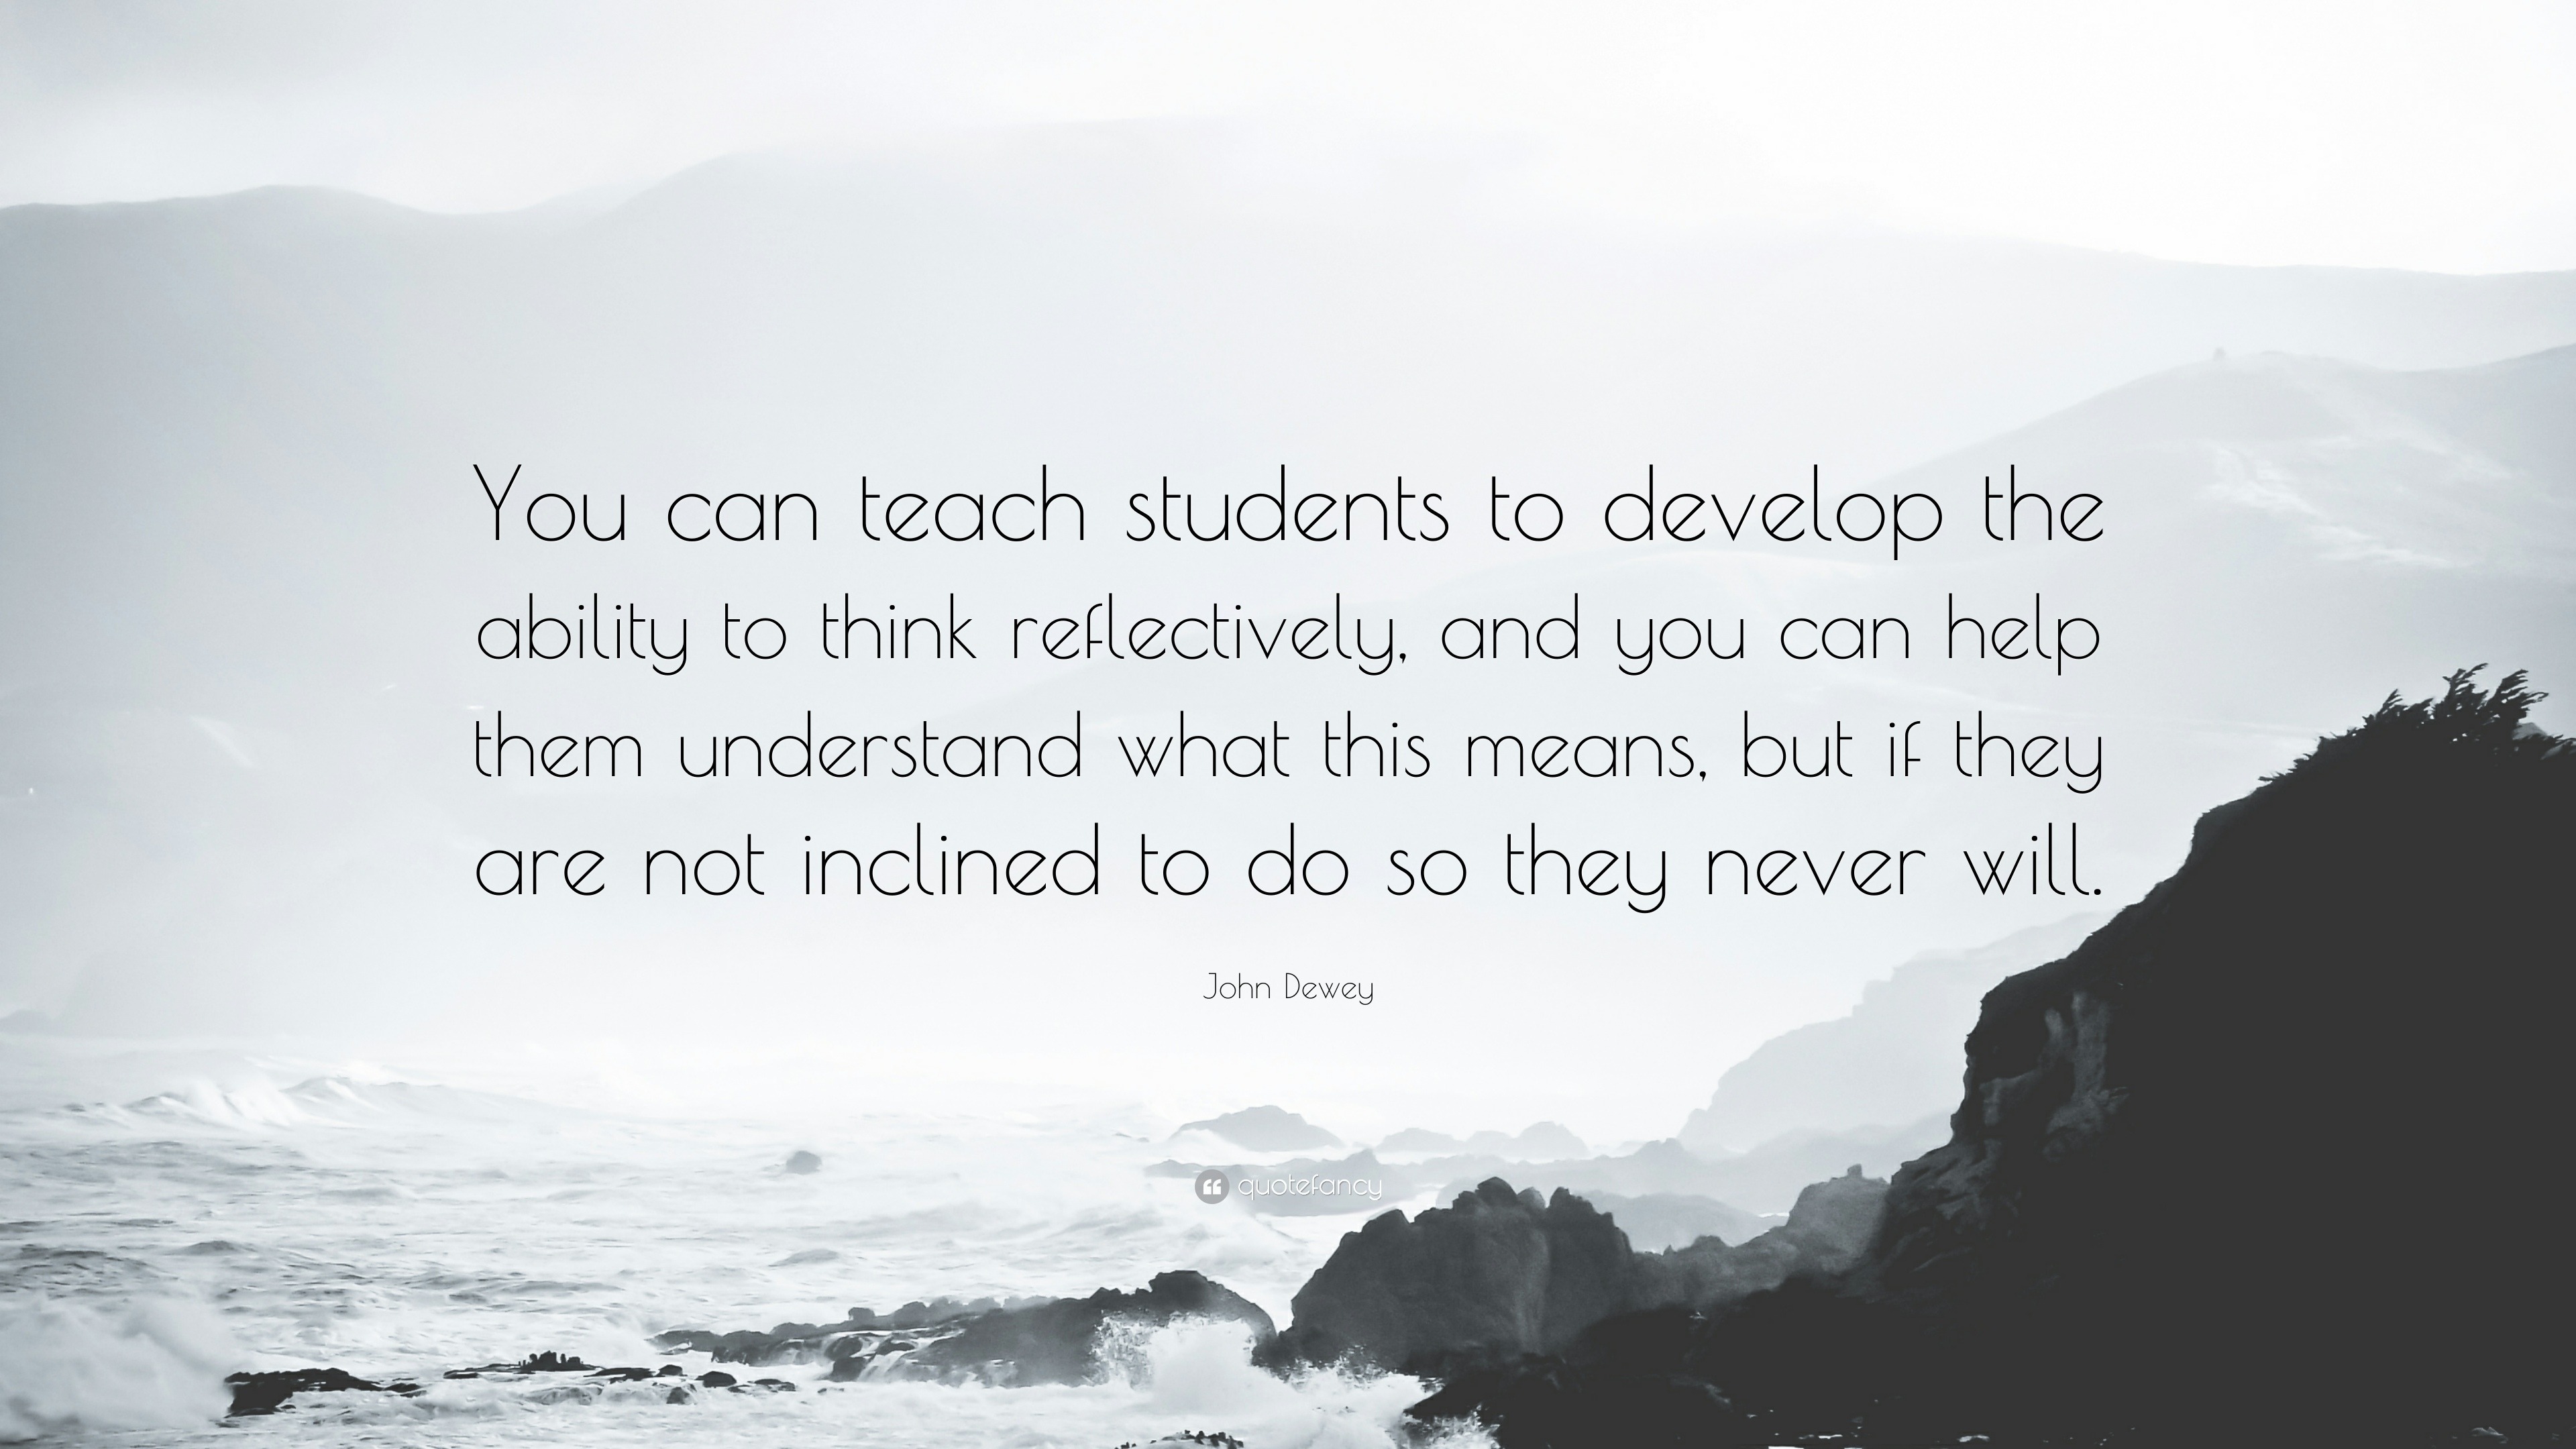 John Dewey Quote: “You can teach students to develop the ability to ...